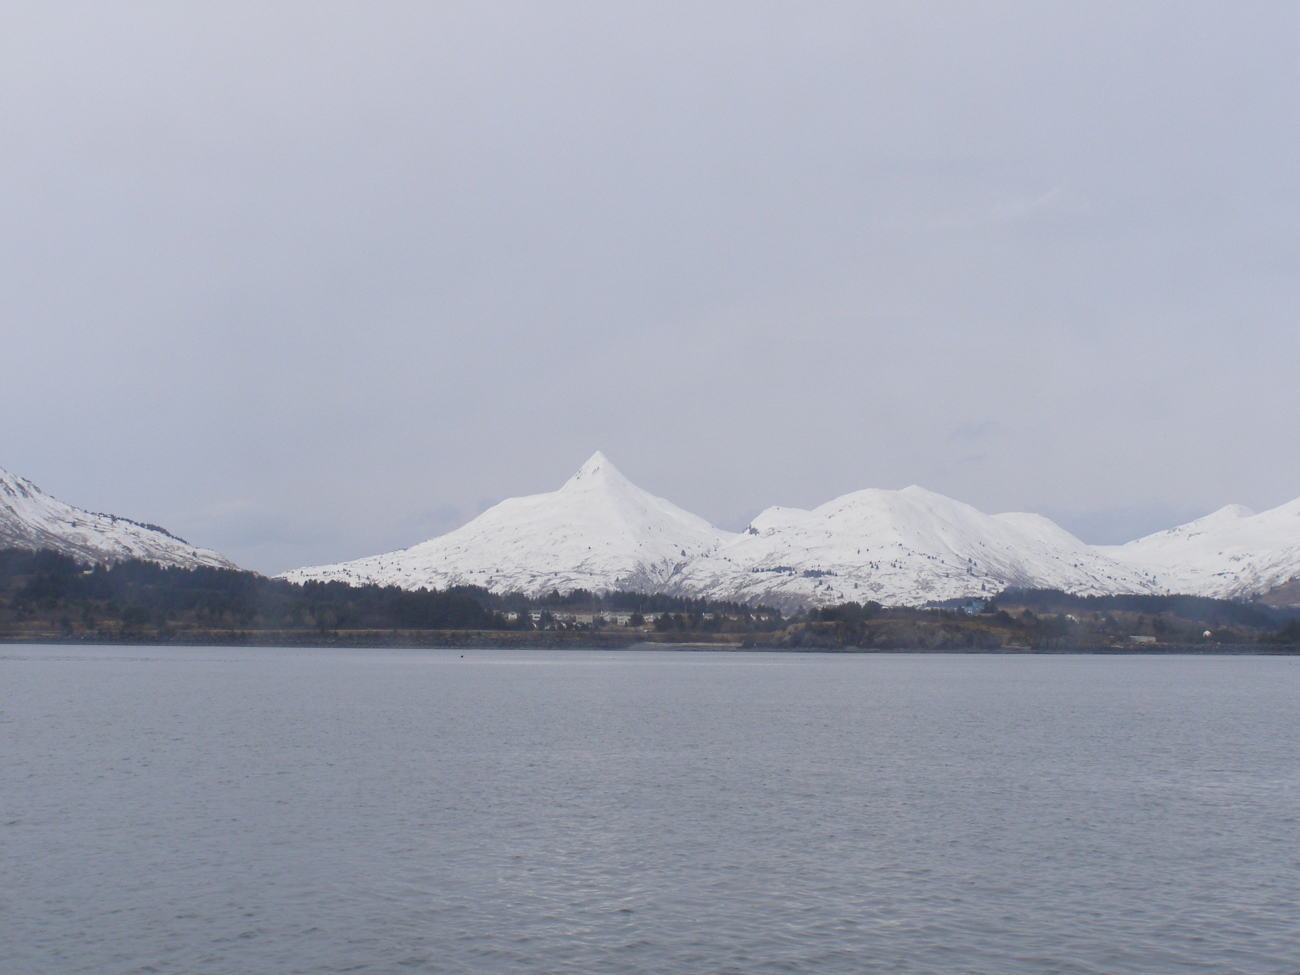 Pyramid Mountain seen from offshore